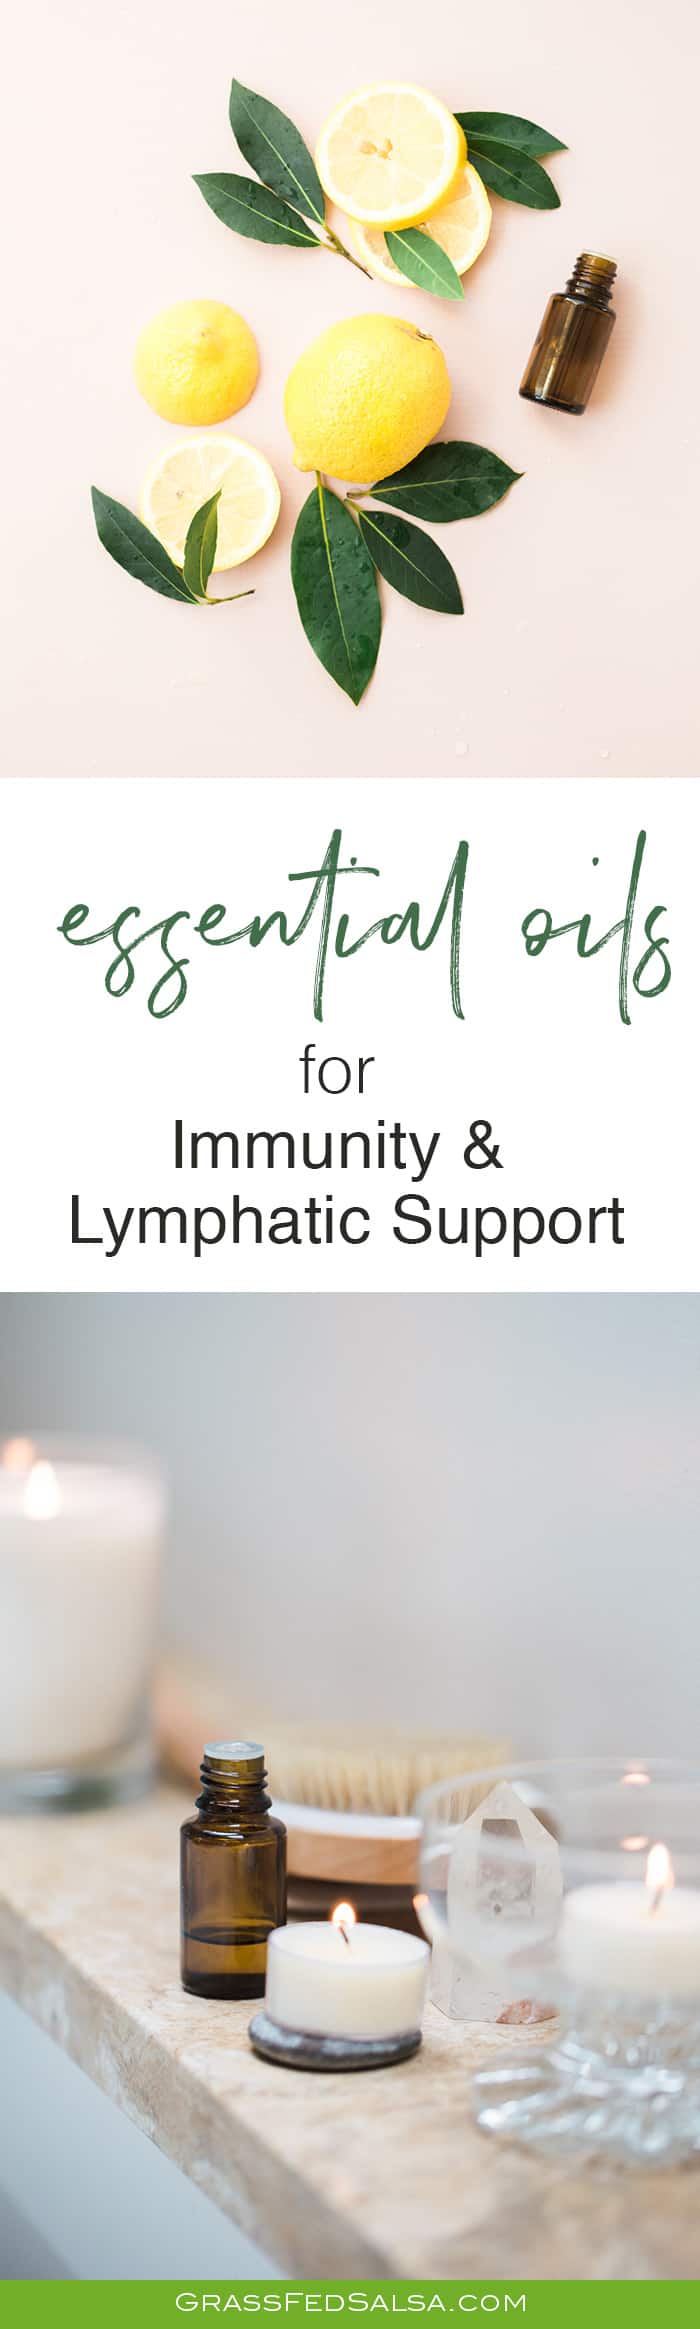 How to use essential oils to support your immune system, detoxify, and boost immunity.